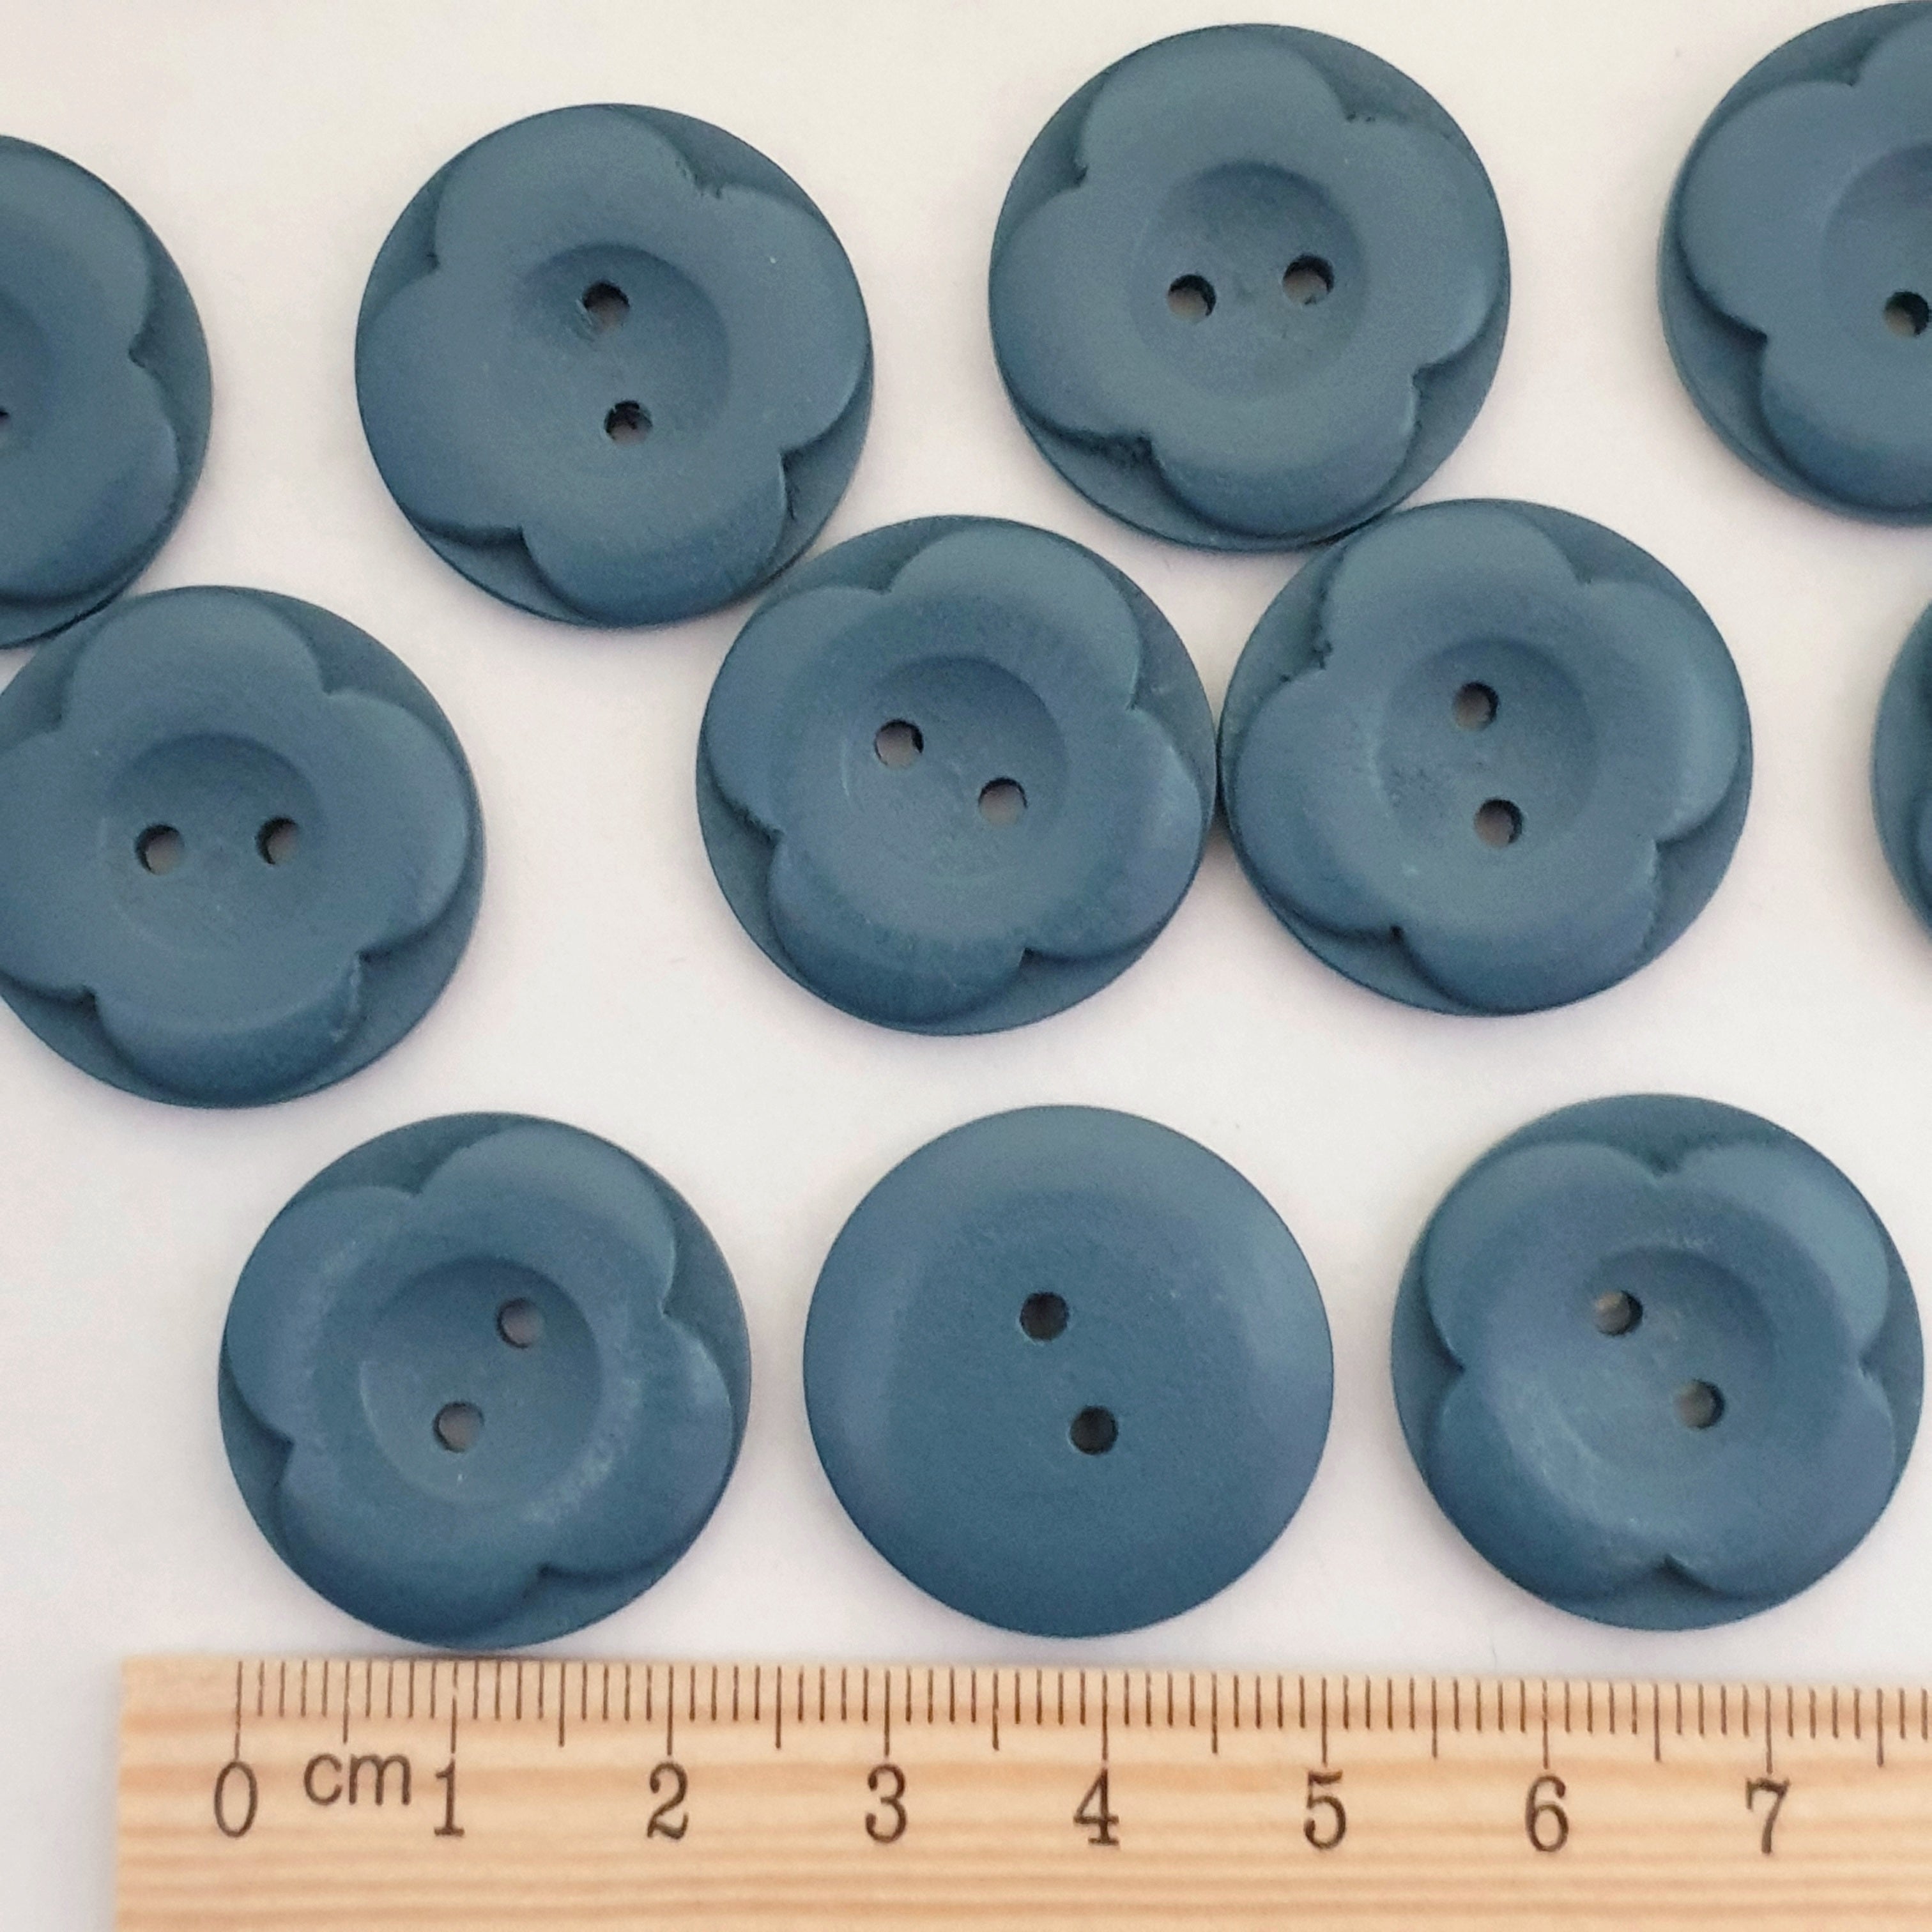 MajorCrafts 12pcs 25mm Cadet Blue Carved Flower 2 Holes Round Wood Sewing Buttons